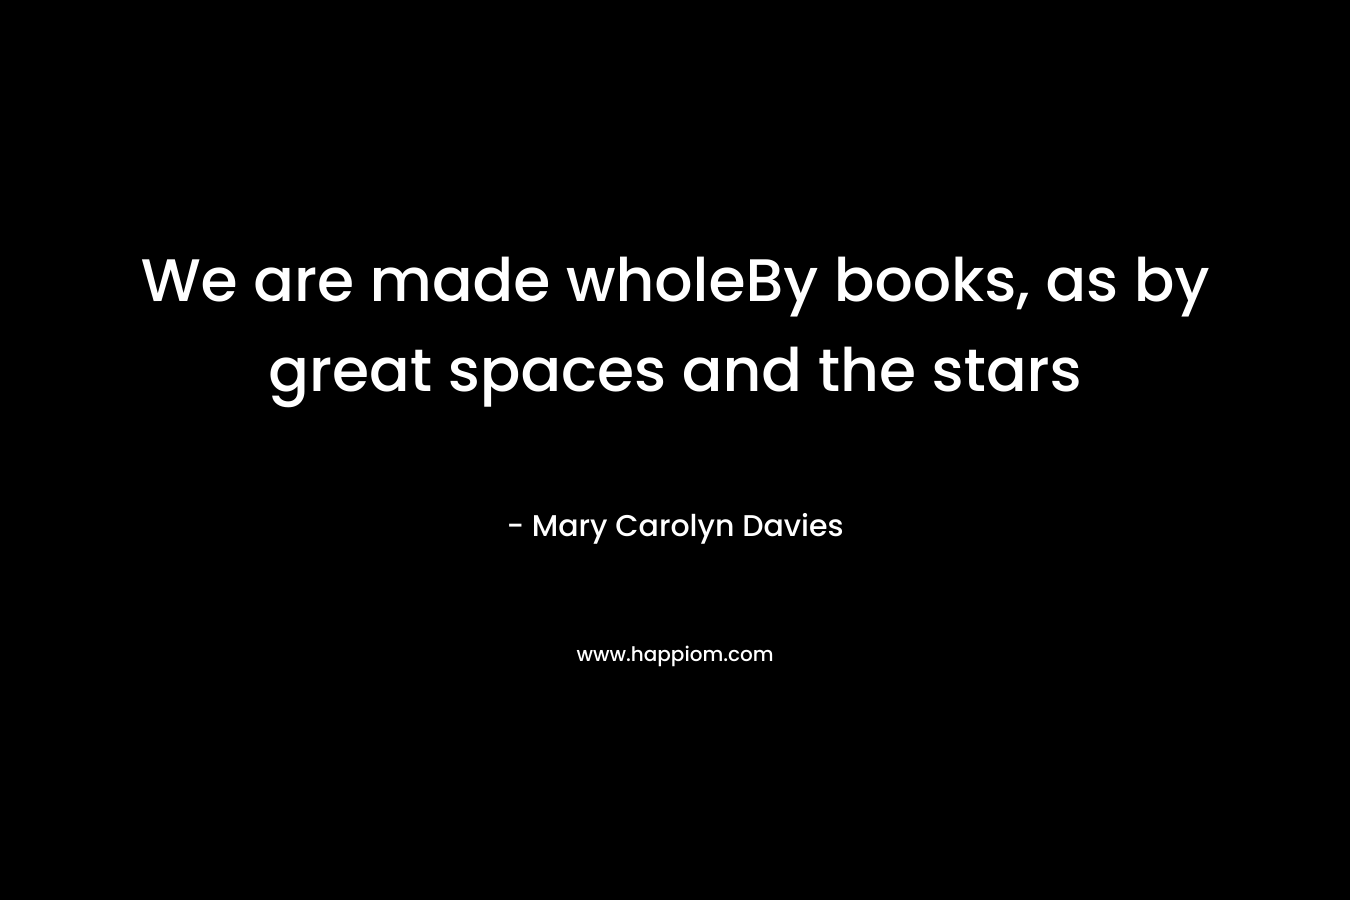 We are made wholeBy books, as by great spaces and the stars